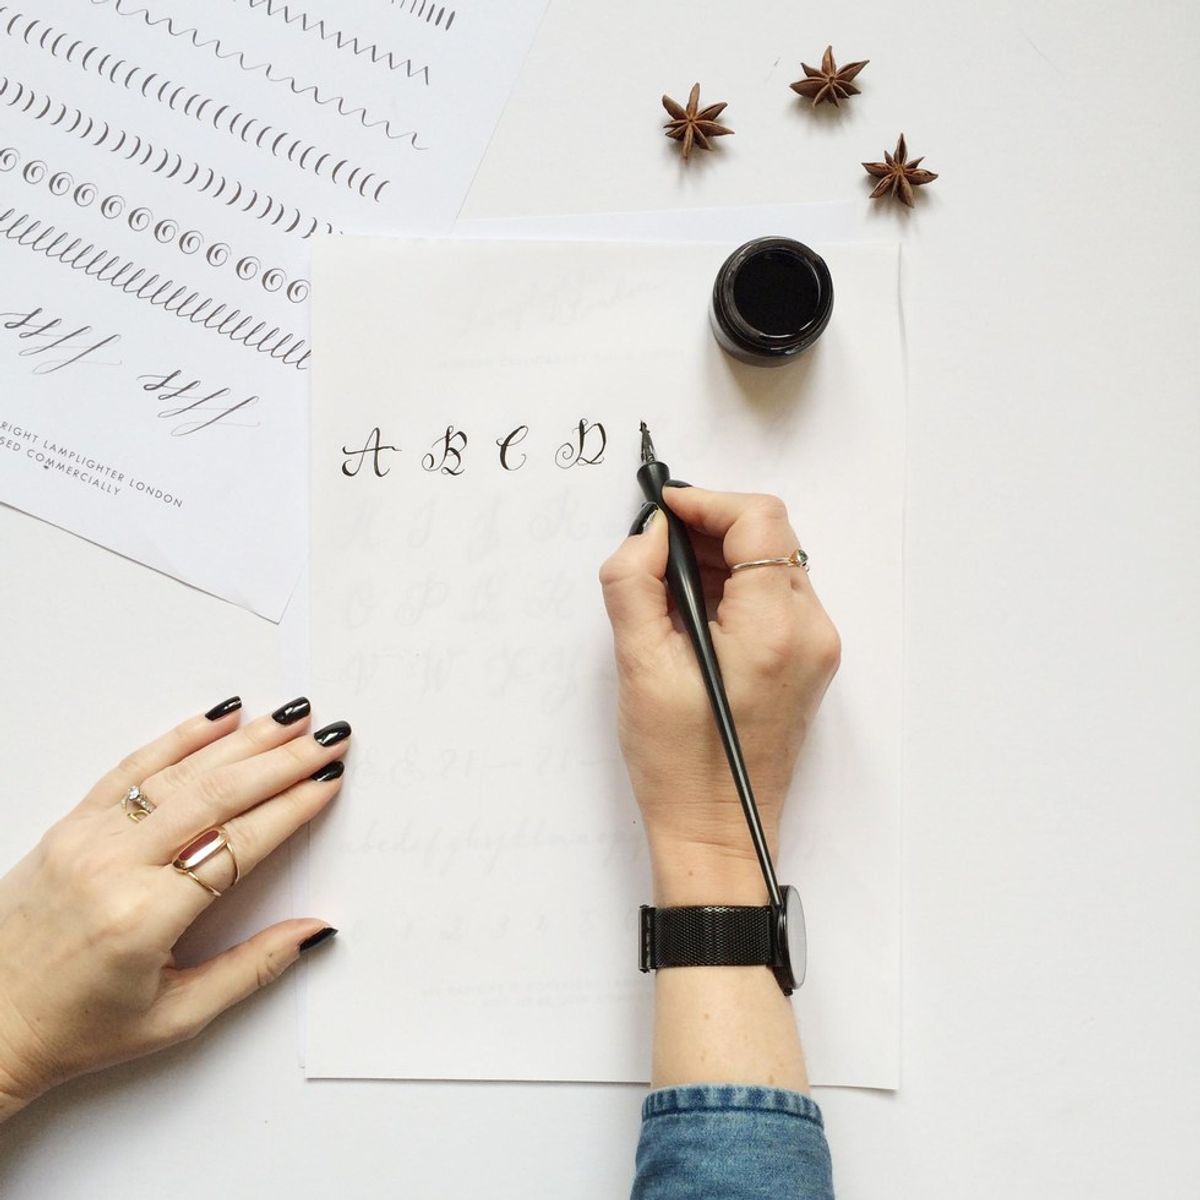 How I Became Obsessed with Calligraphy